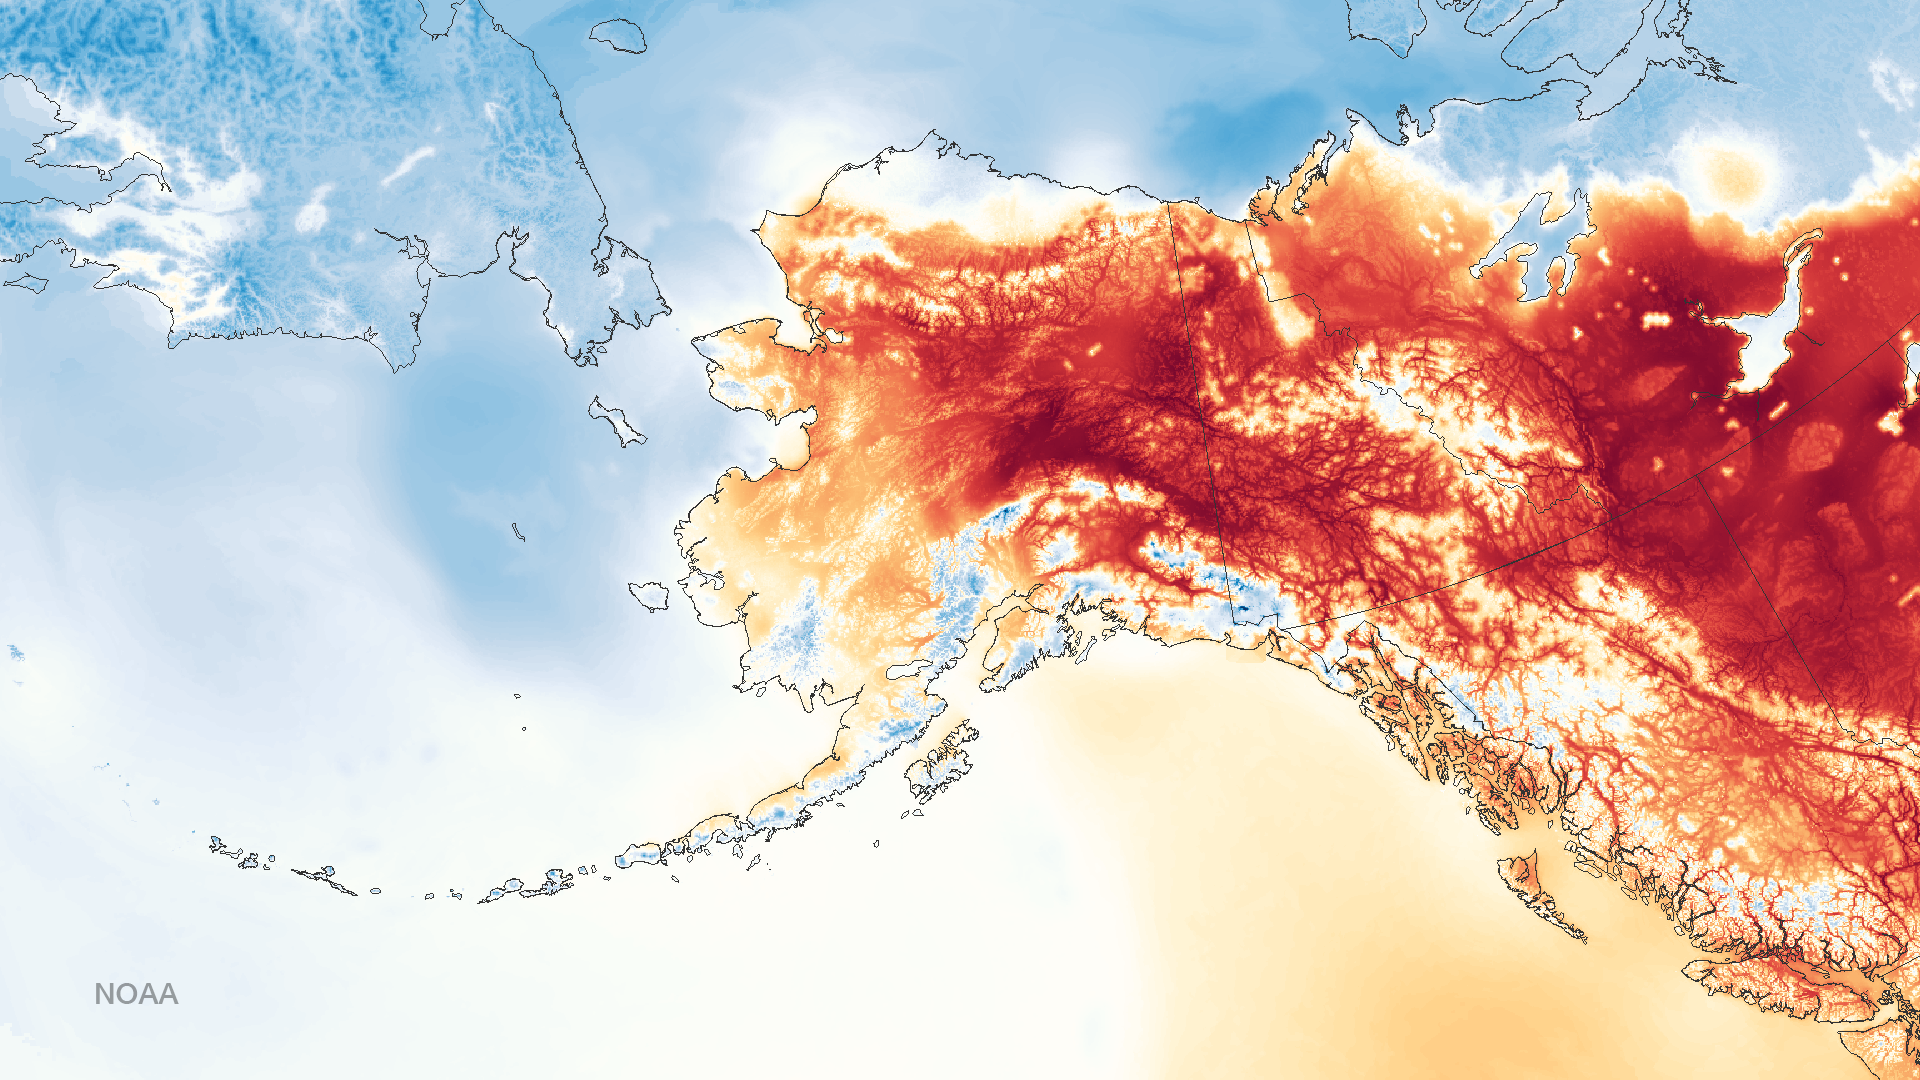 HERE'S WHY POLAR-ORBITING SATELLITES ARE SO CRITICAL FOR WEATHER FORECASTING IN ALASKA